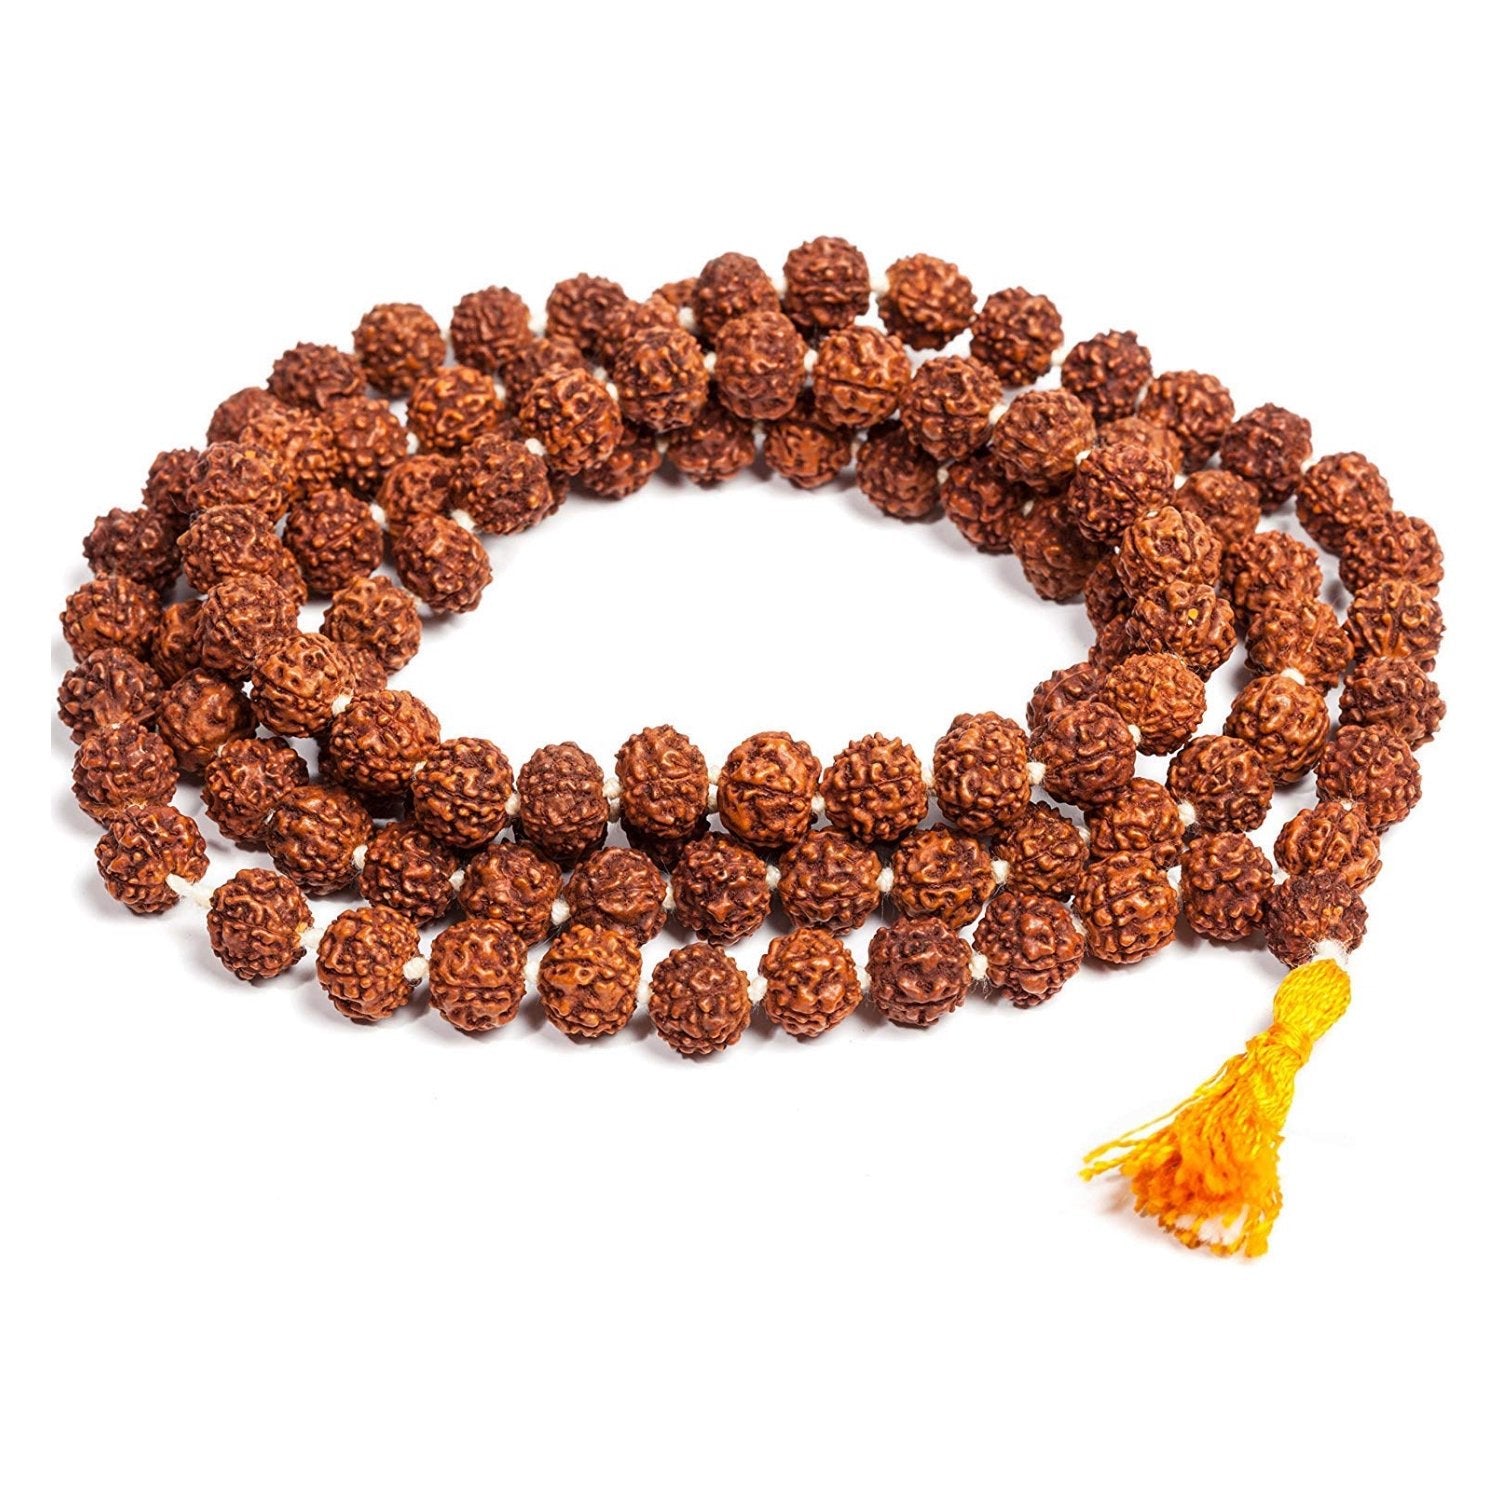 Shiva Rudraksha Mala (Orange) - Top grade lab certified Japa Mala from Haridwar, India. 108+1 prayer beads in 88 cm knotted orange thread with a tassel. 7mm bead size with 5 faces (Panch Mukhi). All our Rudraksha beads are spiritually activated with mantras before shipment.